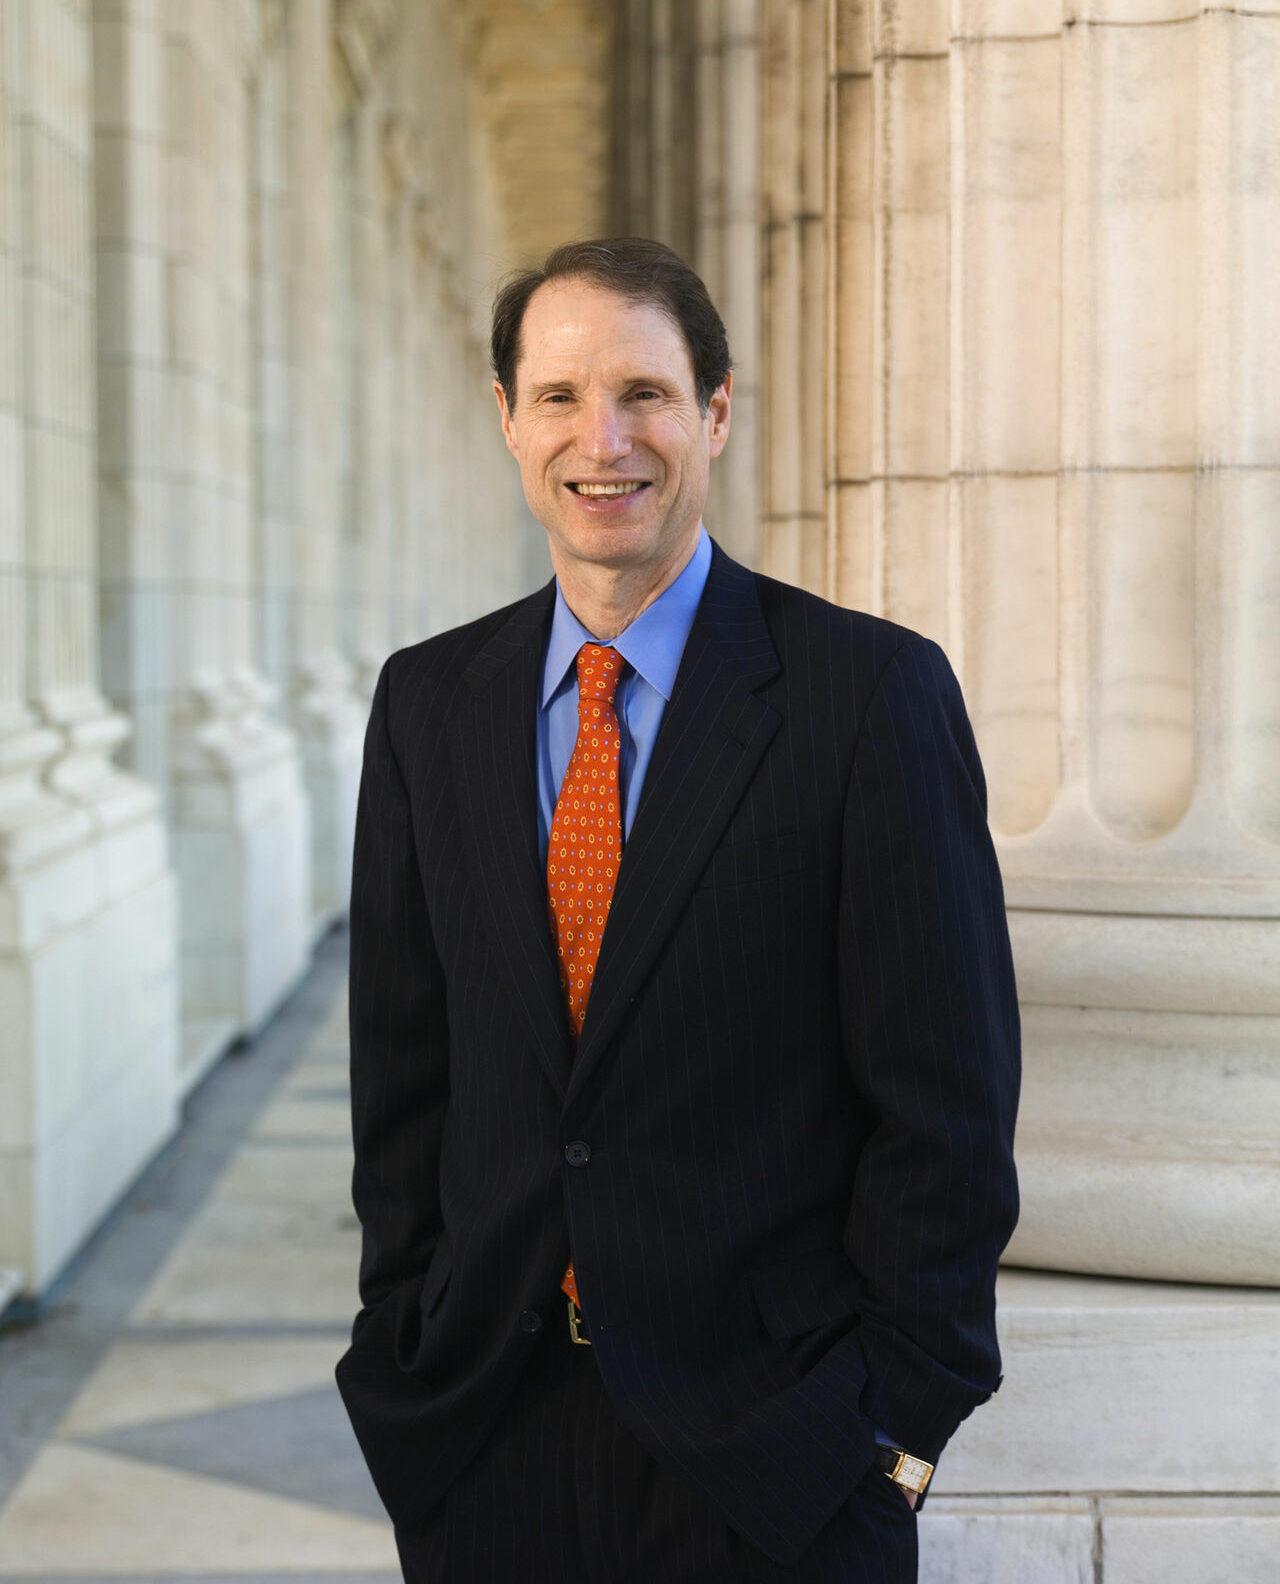 The Honorable Ron Wyden (D-OR)